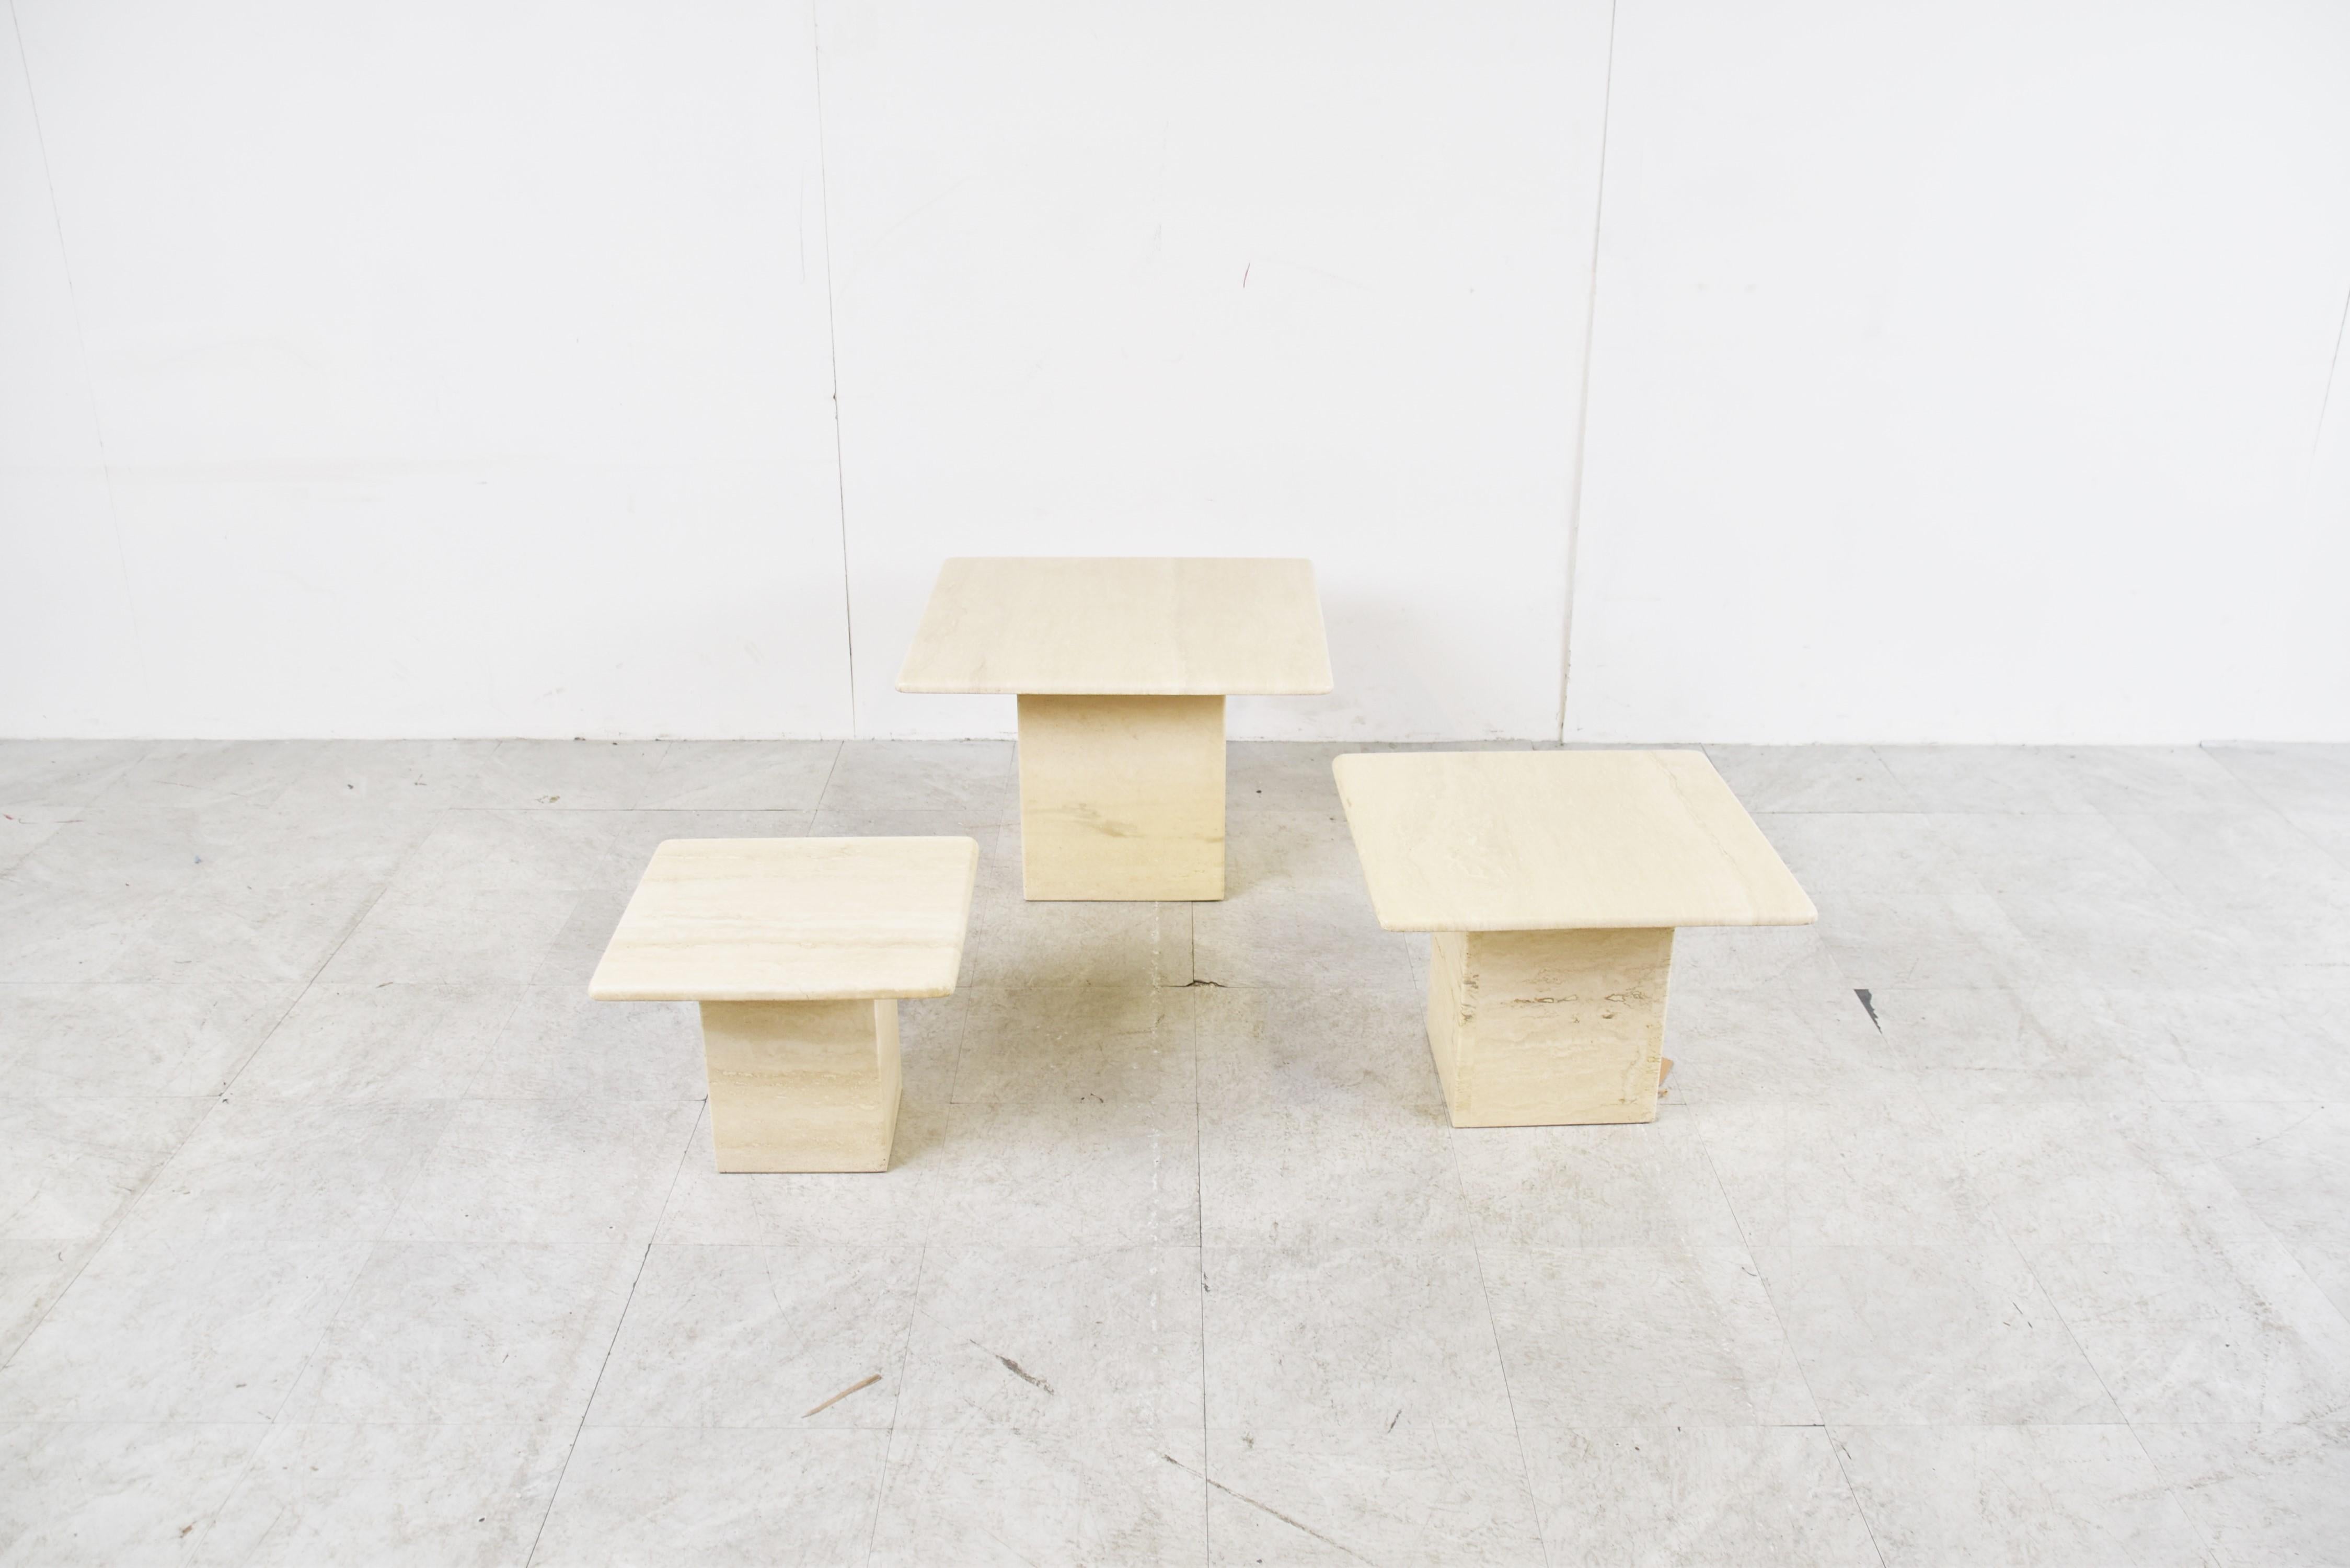 Set of 1970s italian travertine stone nesting tables or side tables.

The tables can be set up in different compositions. Timeless items.

Beautiful colour.

Very good condition

1970s - italy

Dimensions:
Large table: 60*60*40 cm 
Medium table :